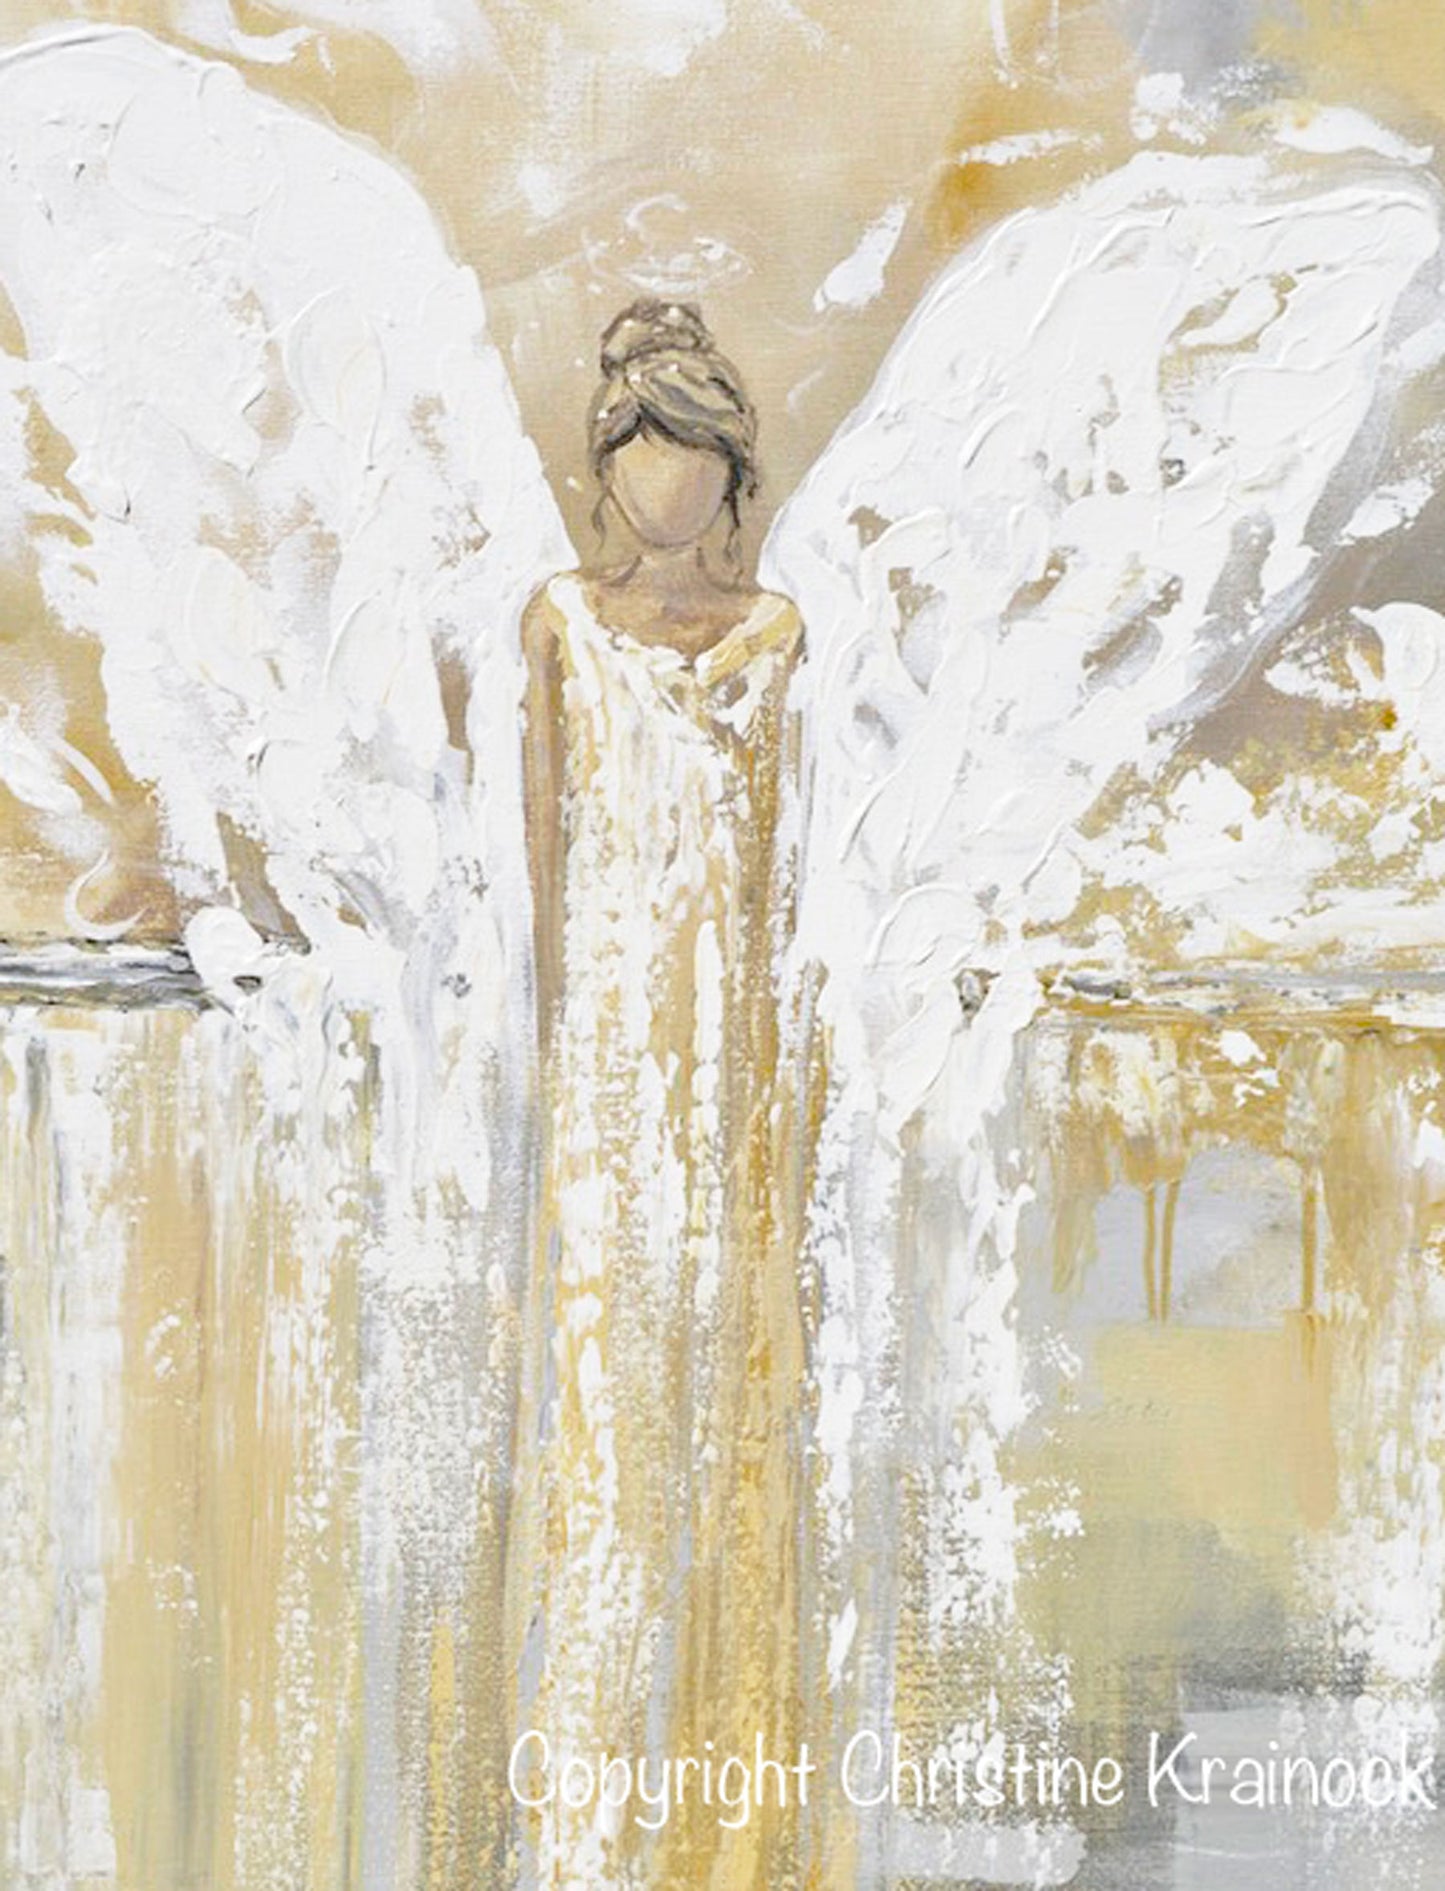 ORIGINAL Abstract Angel Painting Angel of Hope White Yellow Grey Gold Modern Home Decor Wall Art 24x30"